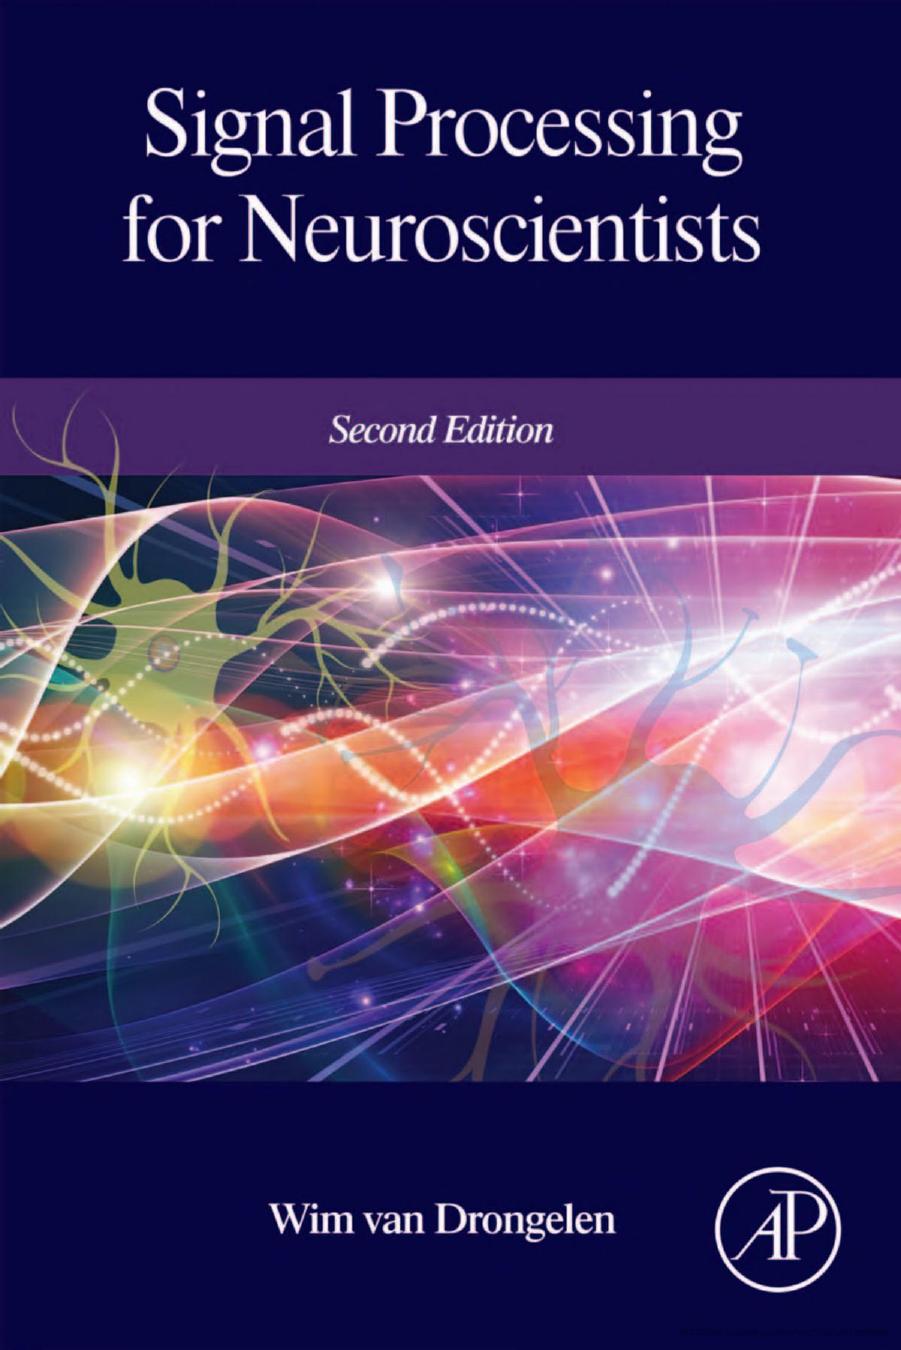 Signal Processing for Neuroscientists, Second Edition